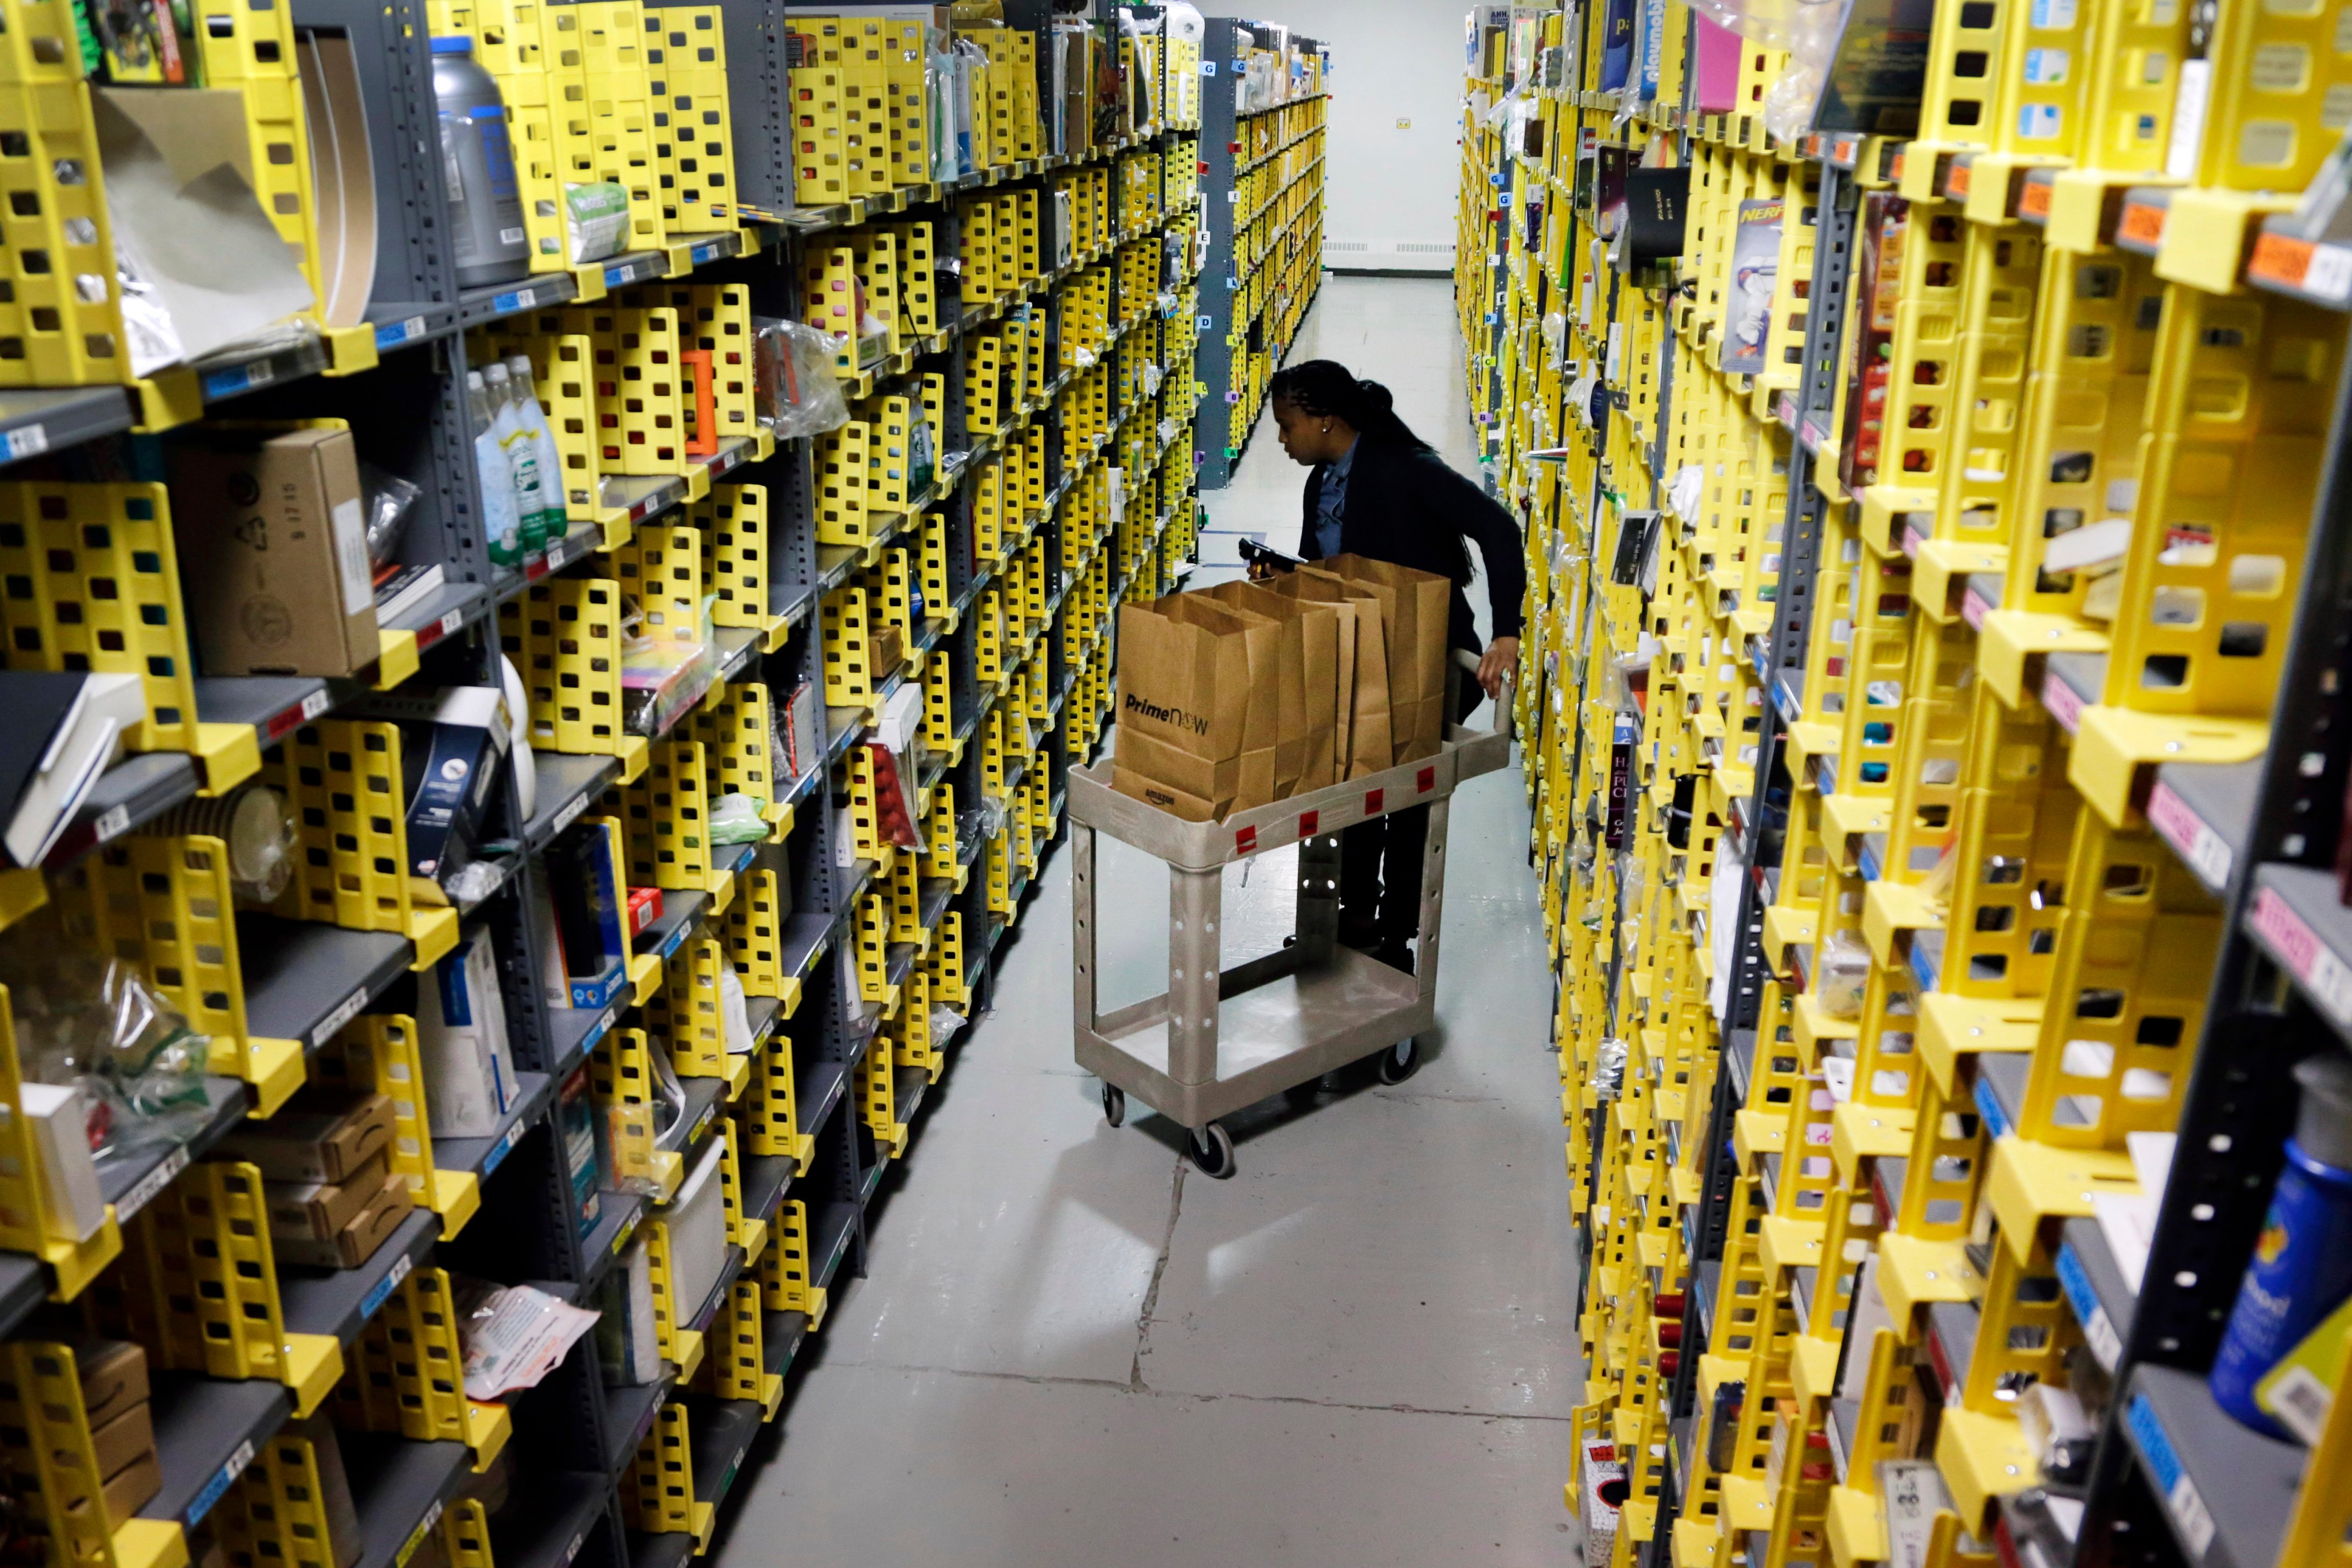 Amazon Prime employee Alicia Jackson hunts for items at the company's urban fulfillment facility that have been ordered by customers on Dec. 22, 2015, in New York. (Mark Lennihan—AP)